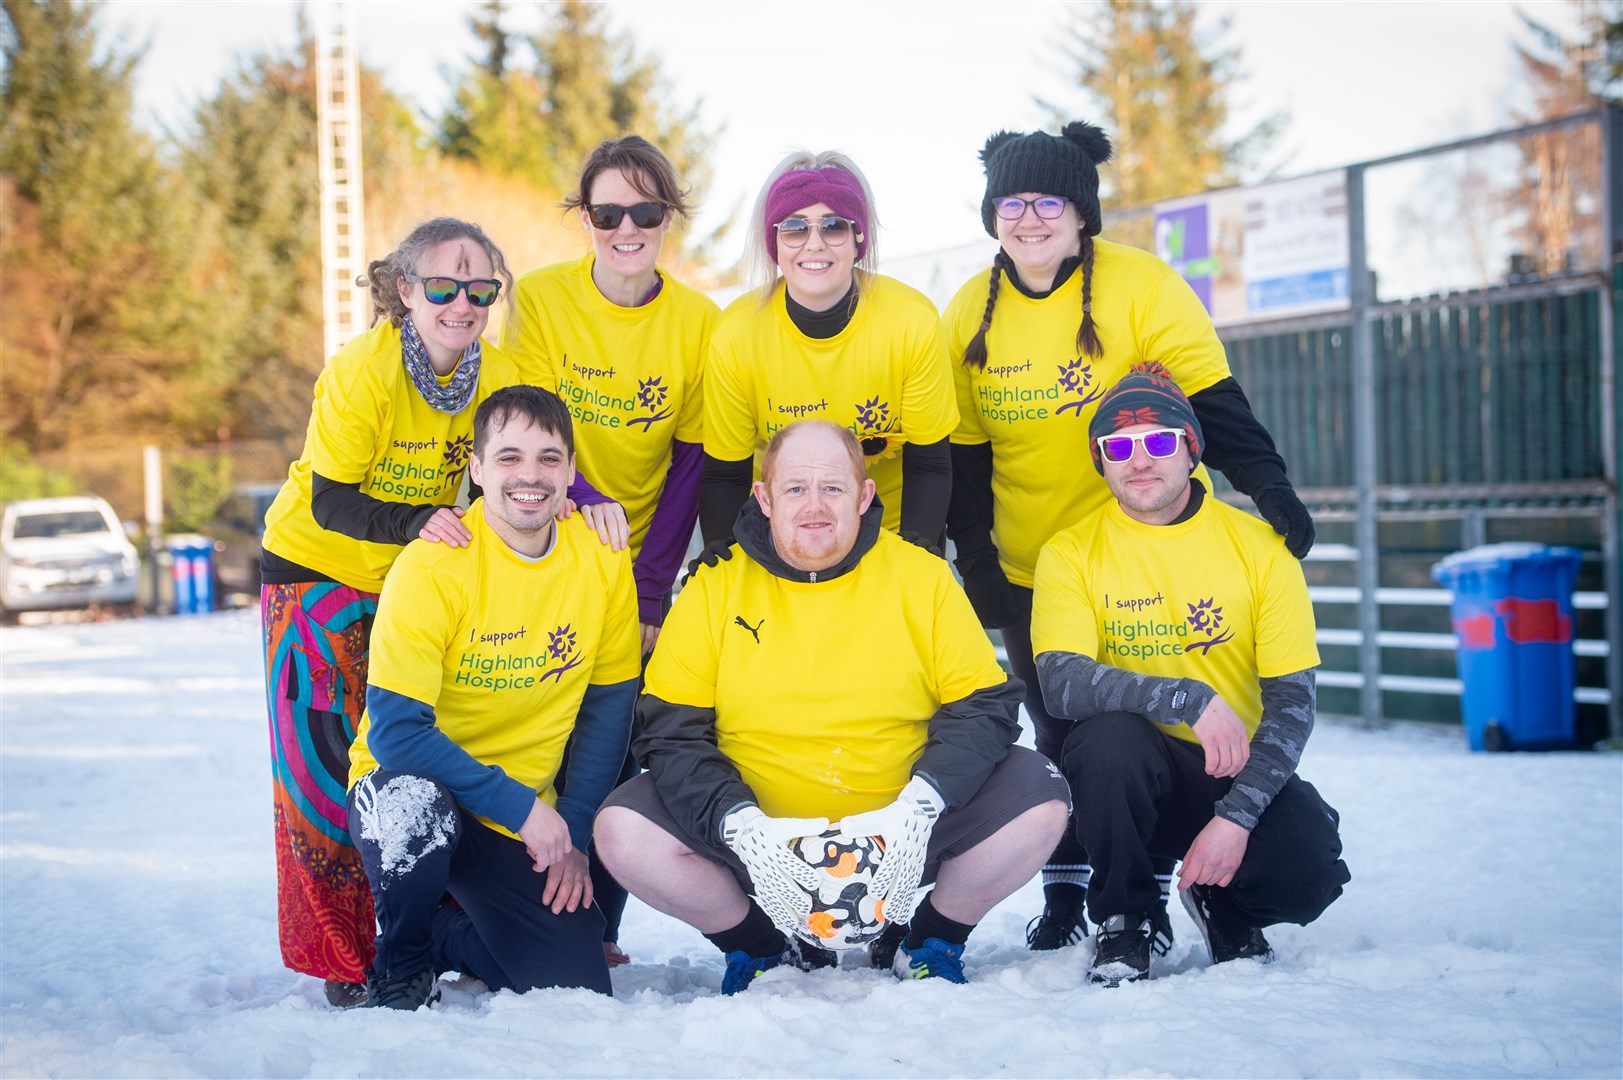 Kirsty's team (back, left to right) Emma Mccallum, Colleen Mackenzie, Kirsty Littlejohn, Megan Davidson, (front, left to right) James Bruton, Craig Ross and Conor Giill.